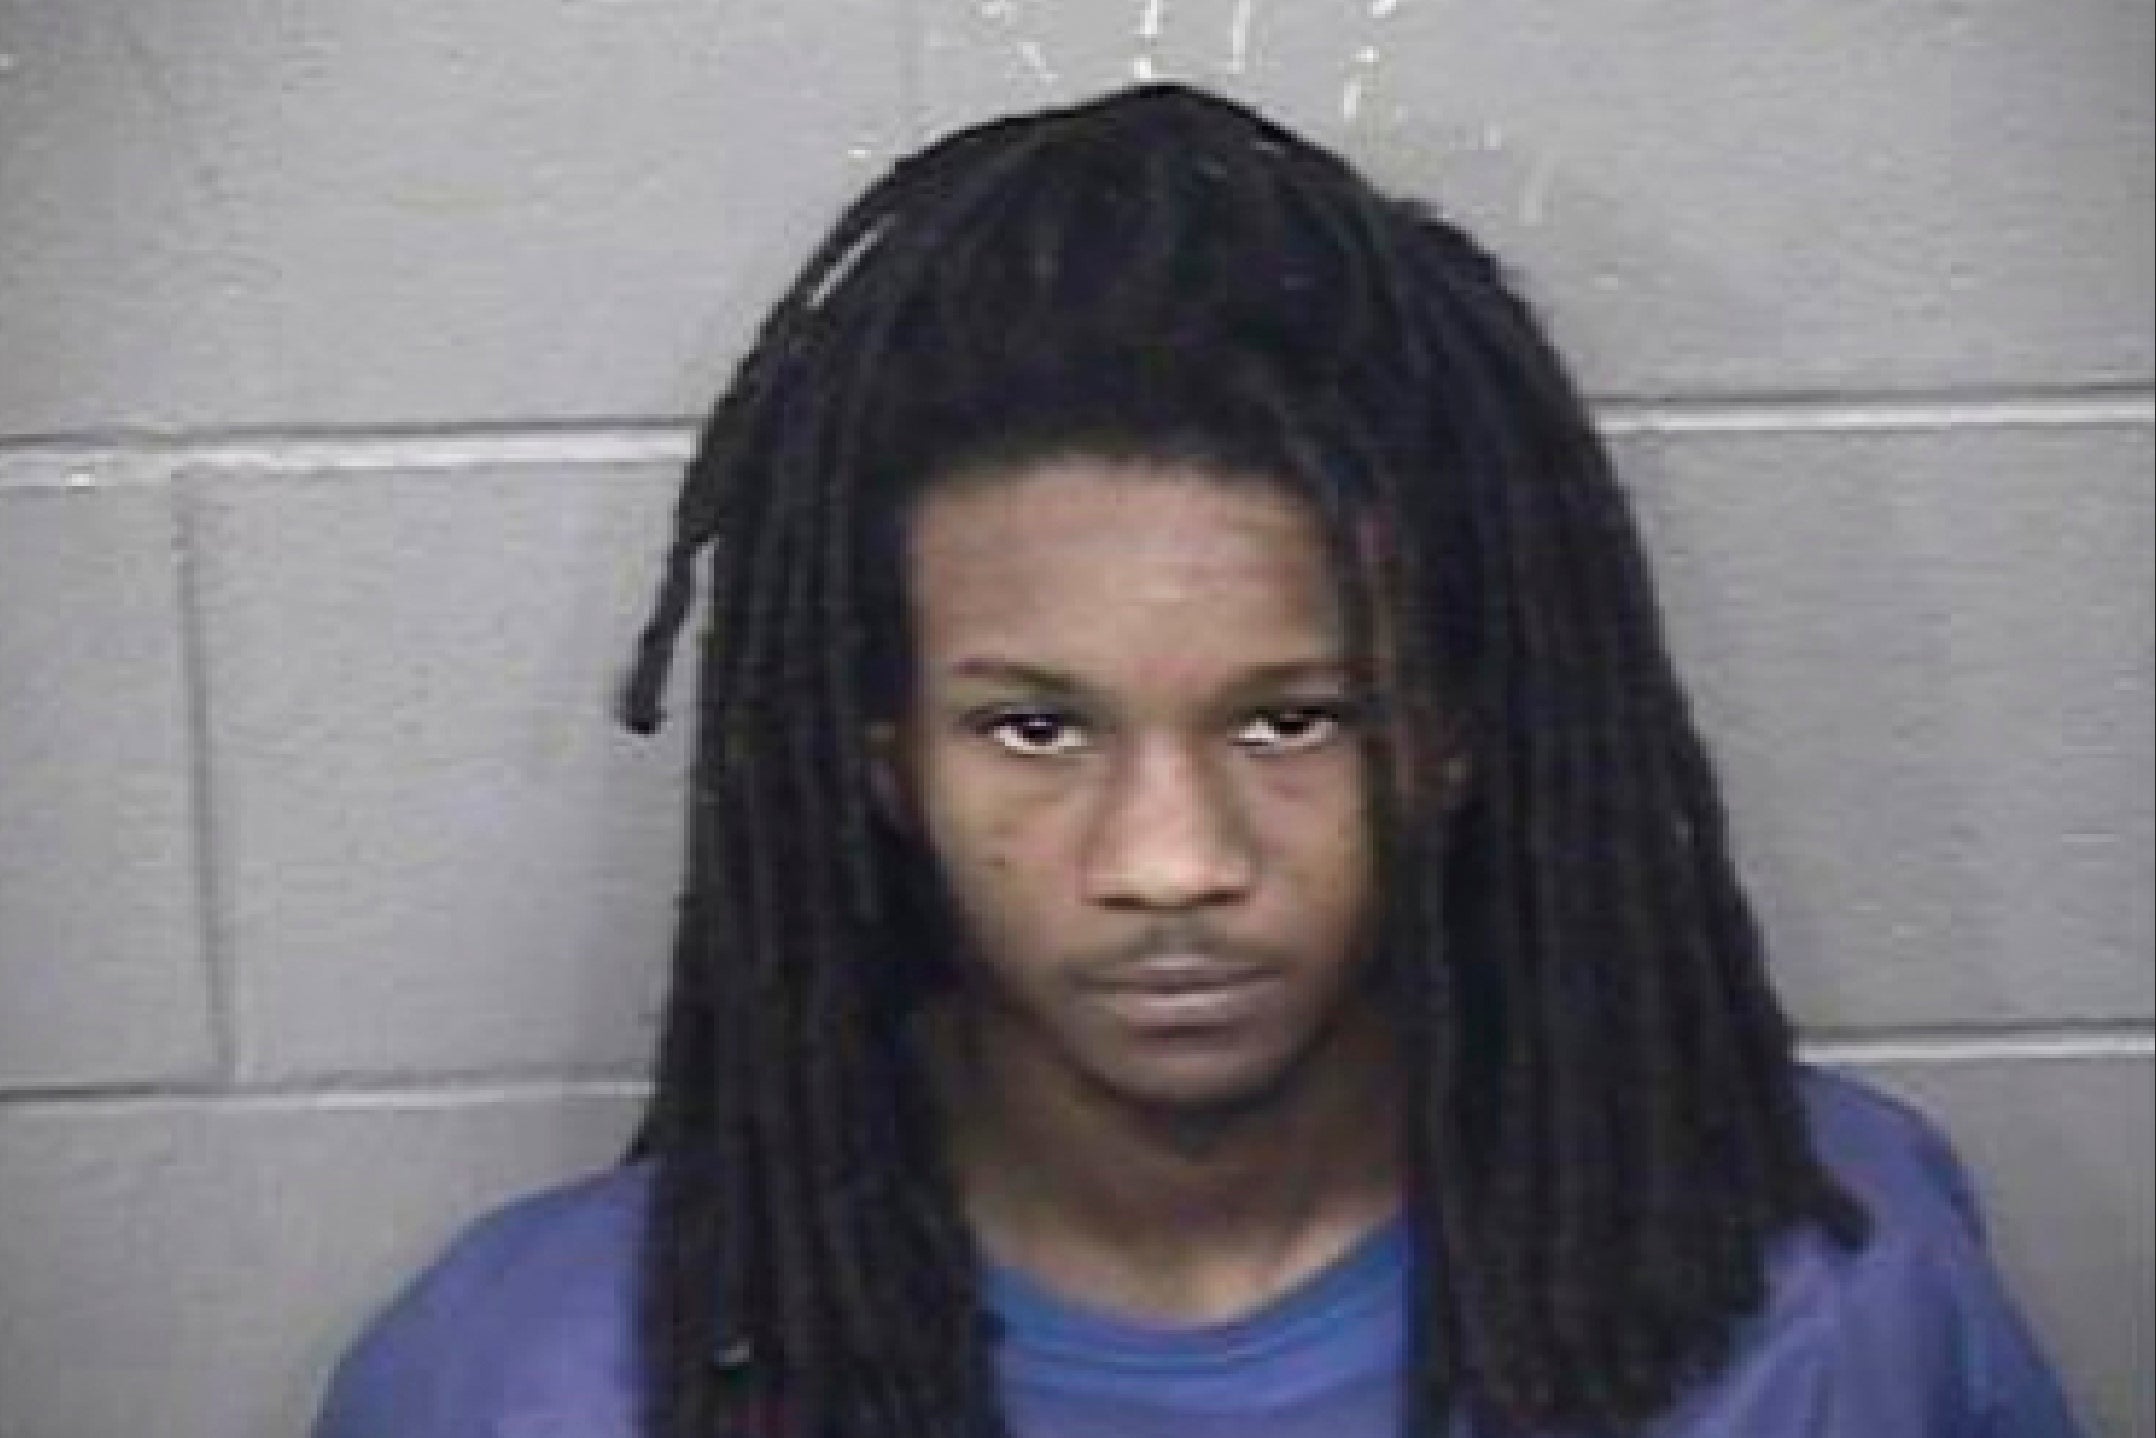 Terry Young, pictured in a booking photo, will go to trial next year on charges related to the Kansas City Valentine’s Day shooting